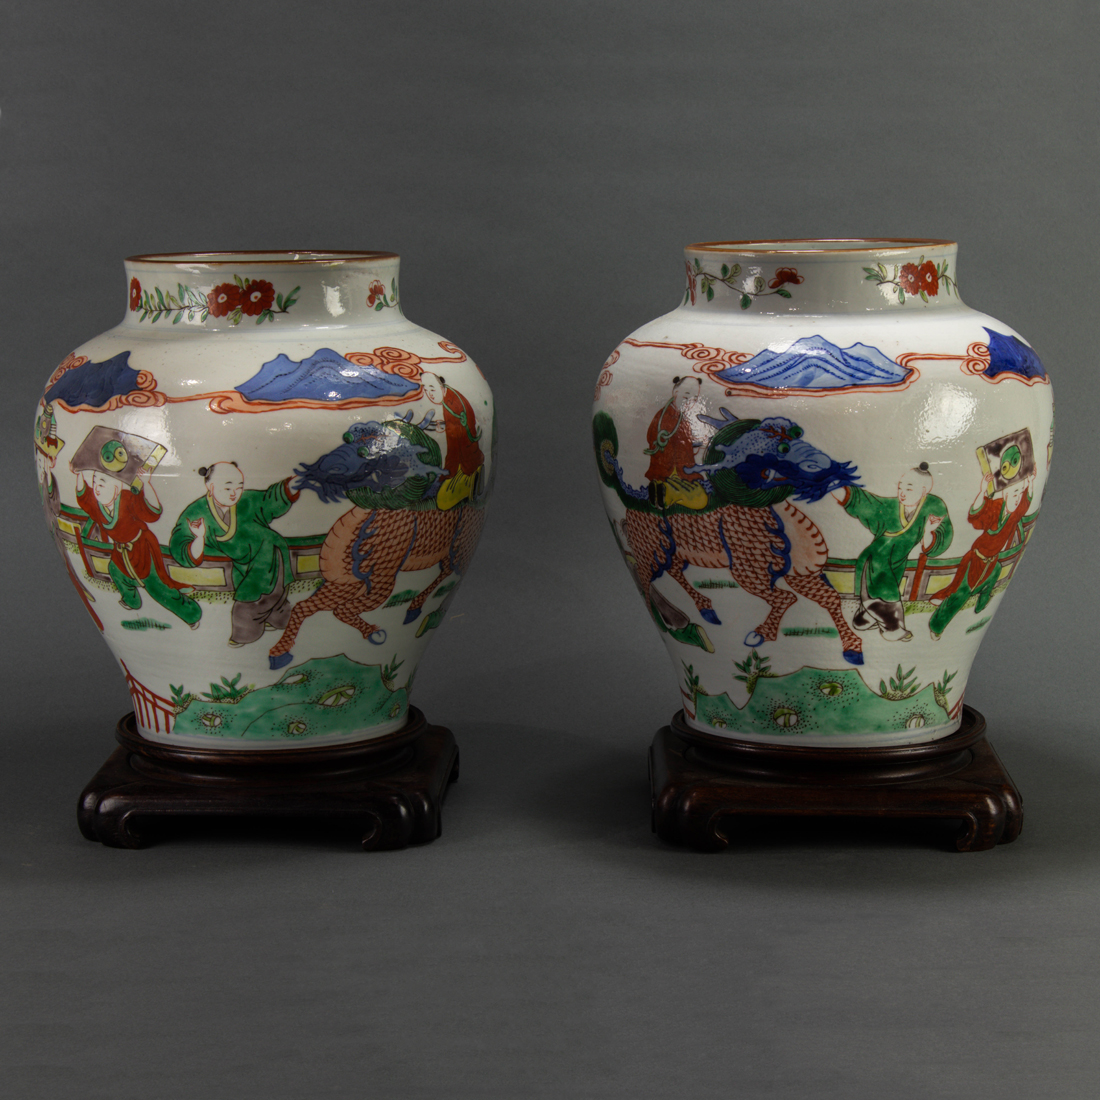 PAIR OF CHINESE WUCAI JARS Pair 3a1d88